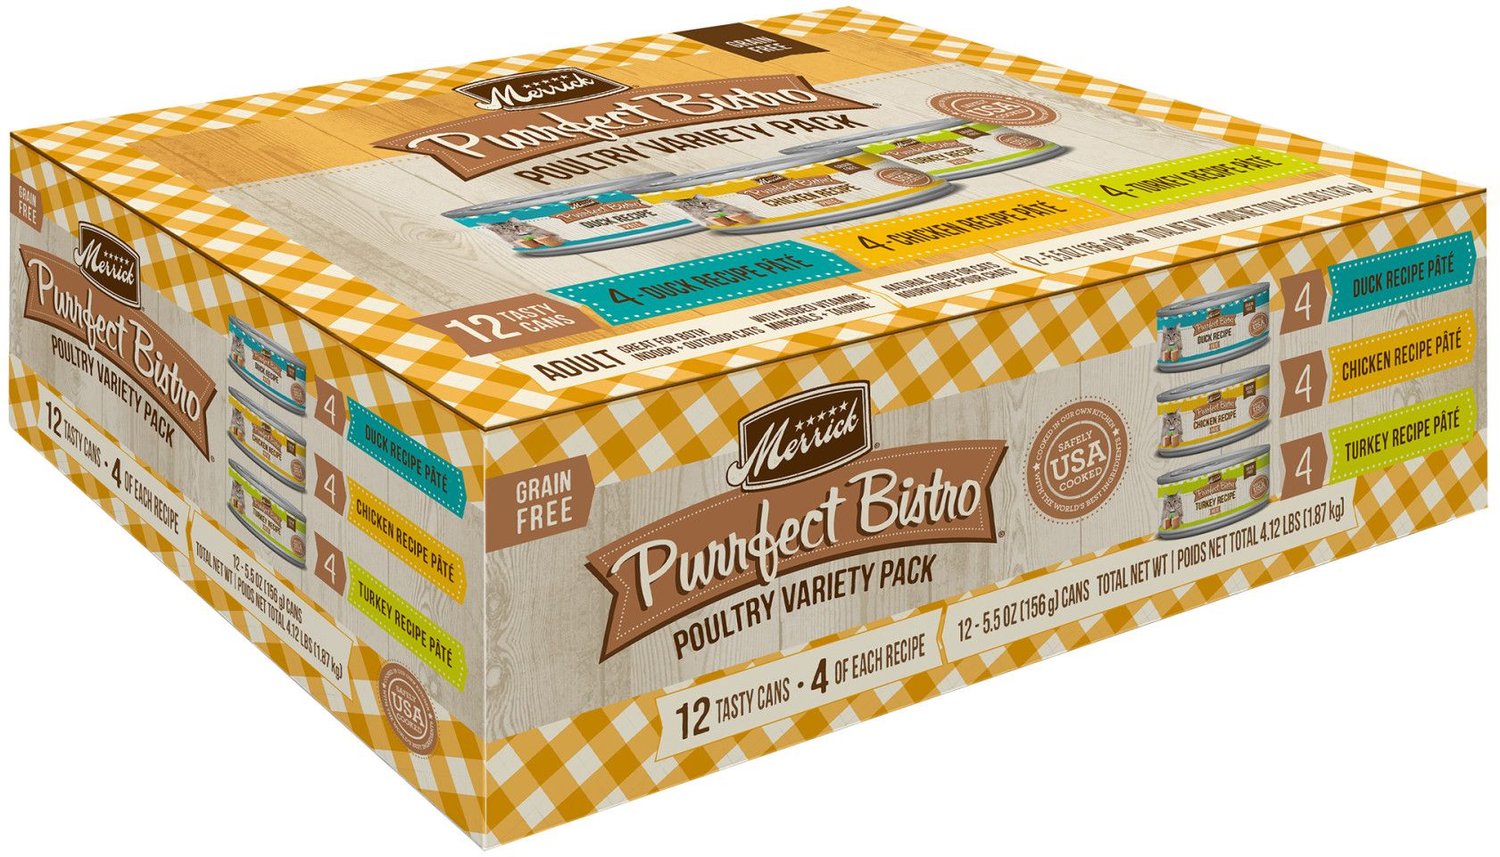 Merrick Purrfect Bistro Poultry Grain-Free Variety Pack